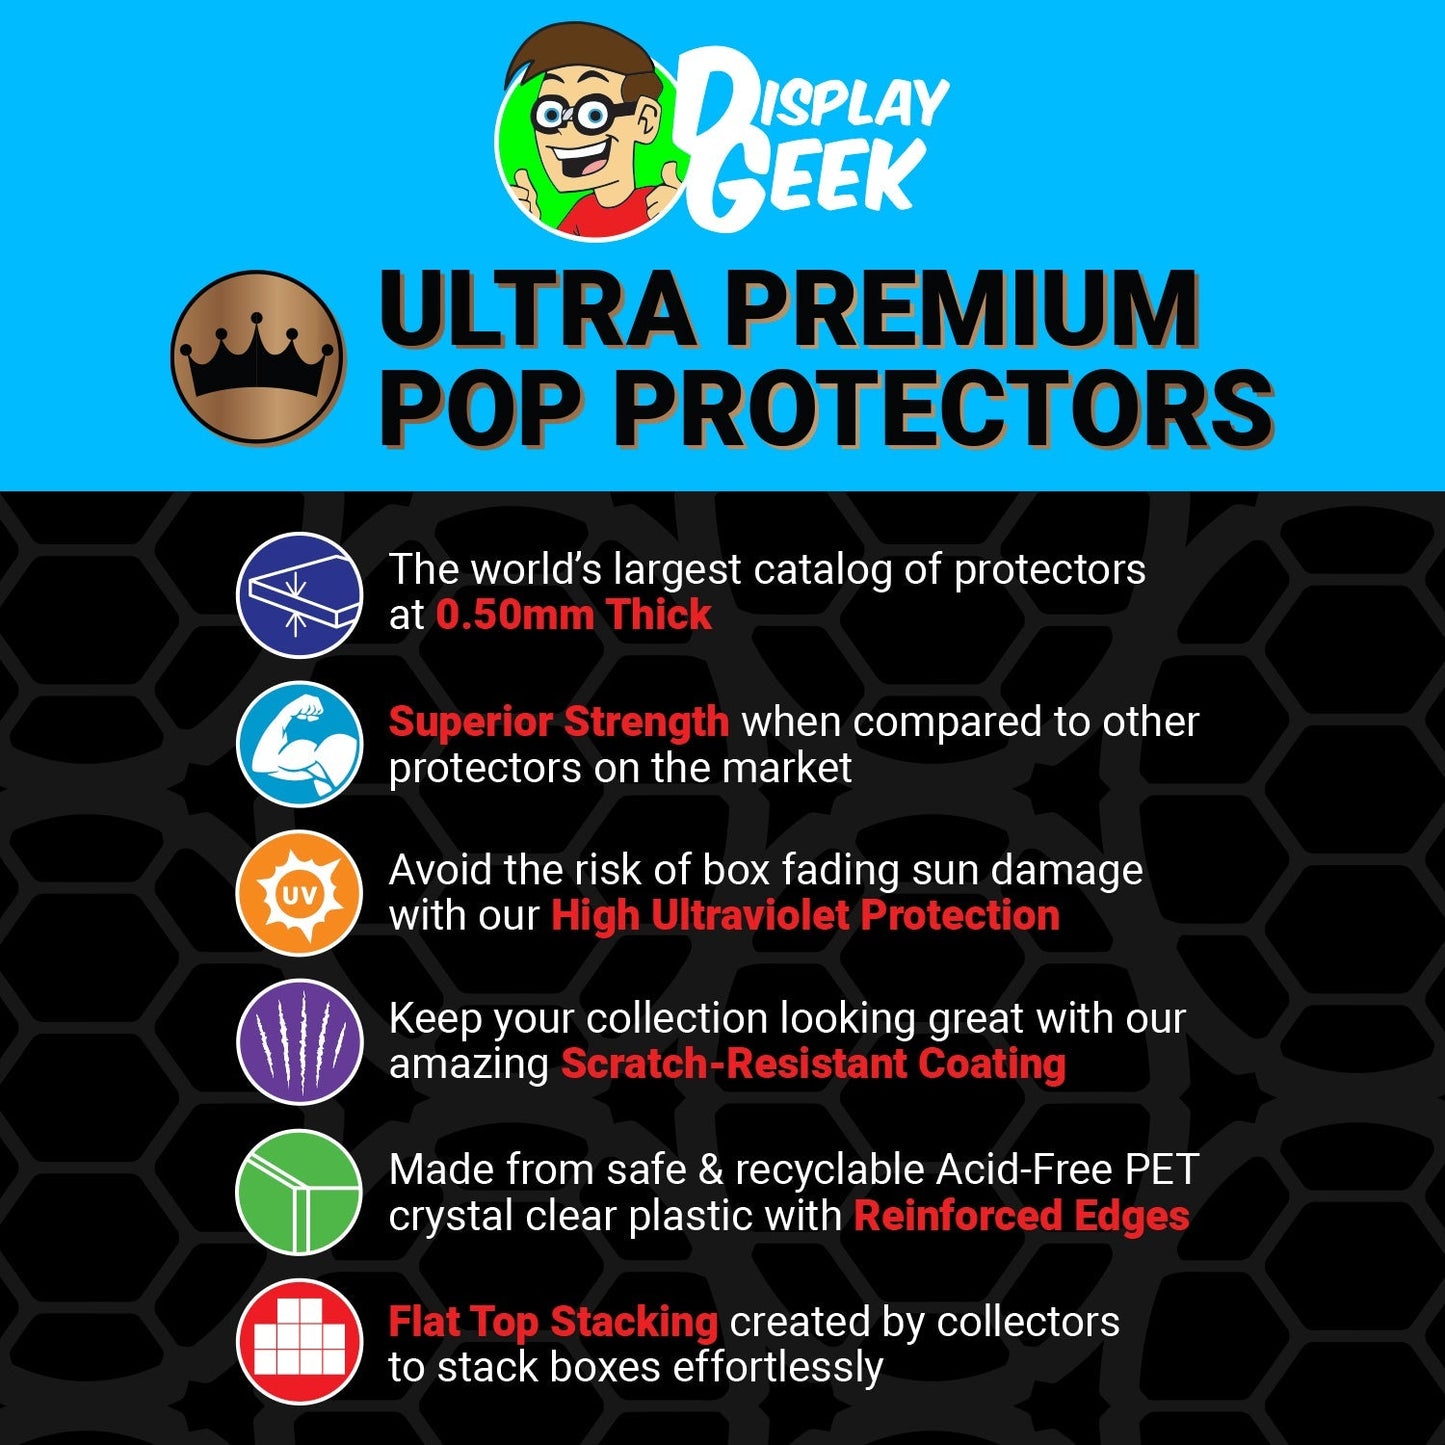 Pop Protector for Corpse Bride Victor and Emily #1349 Funko Pop Moment - PPG Pop Protector Guide Search Created by Display Geek